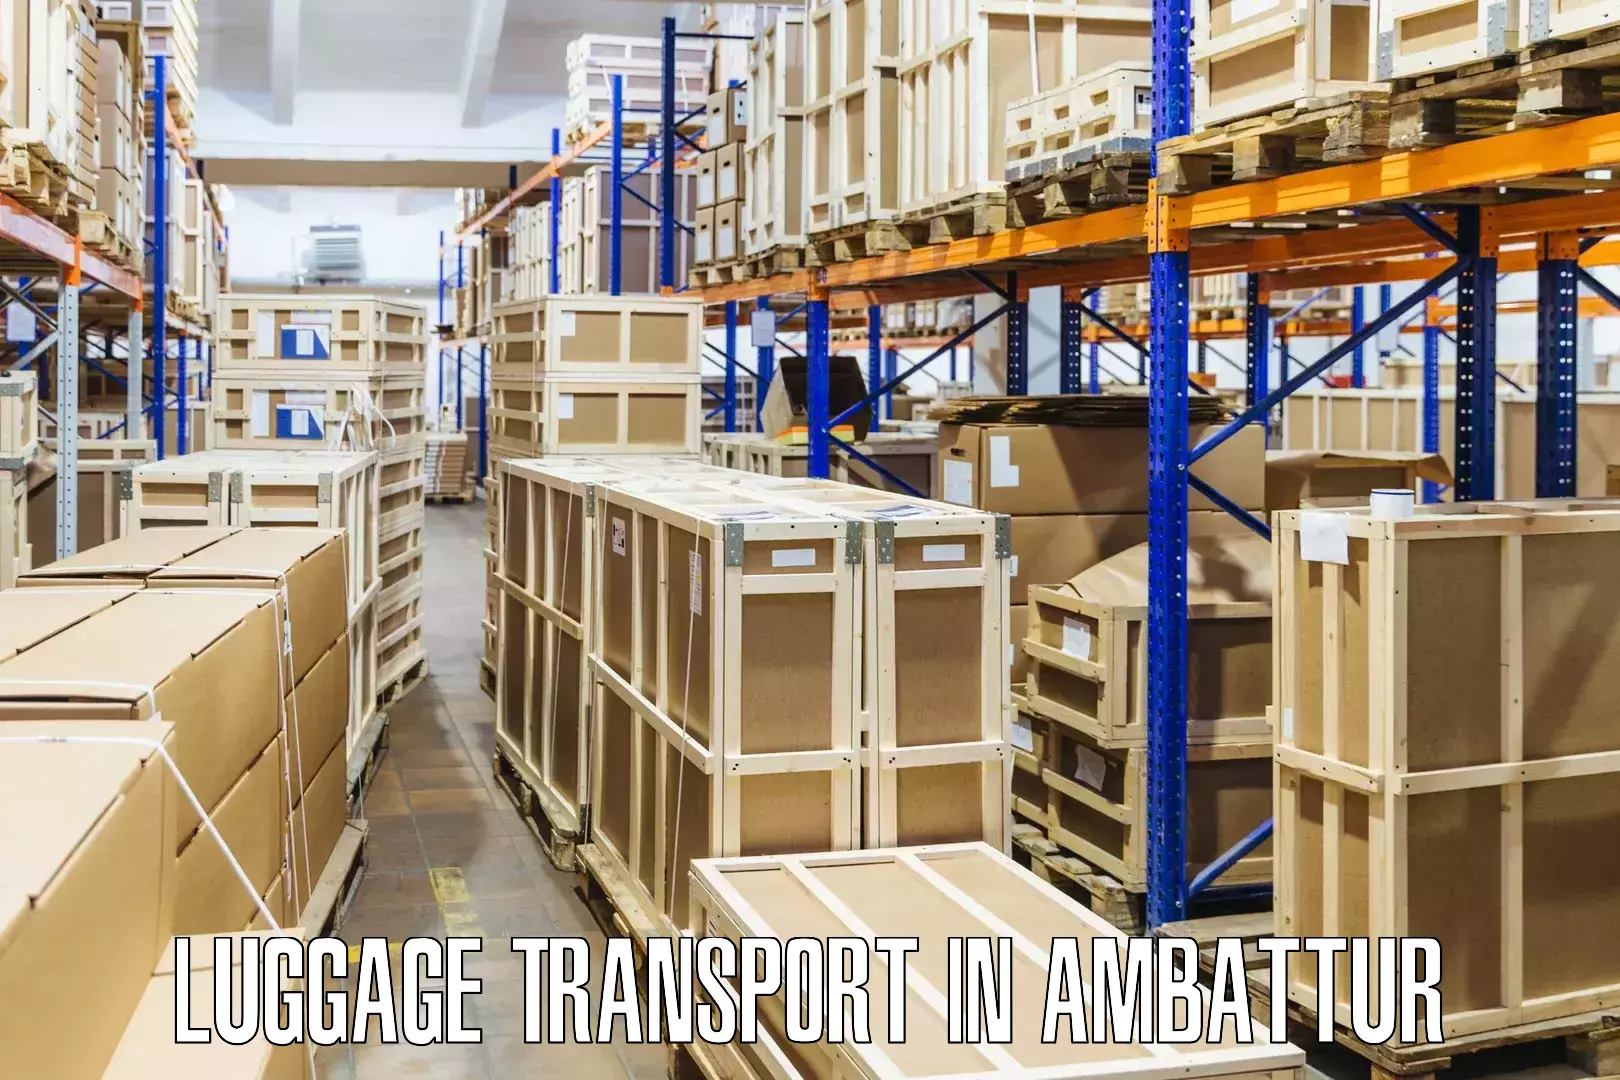 Holiday baggage shipping in Ambattur